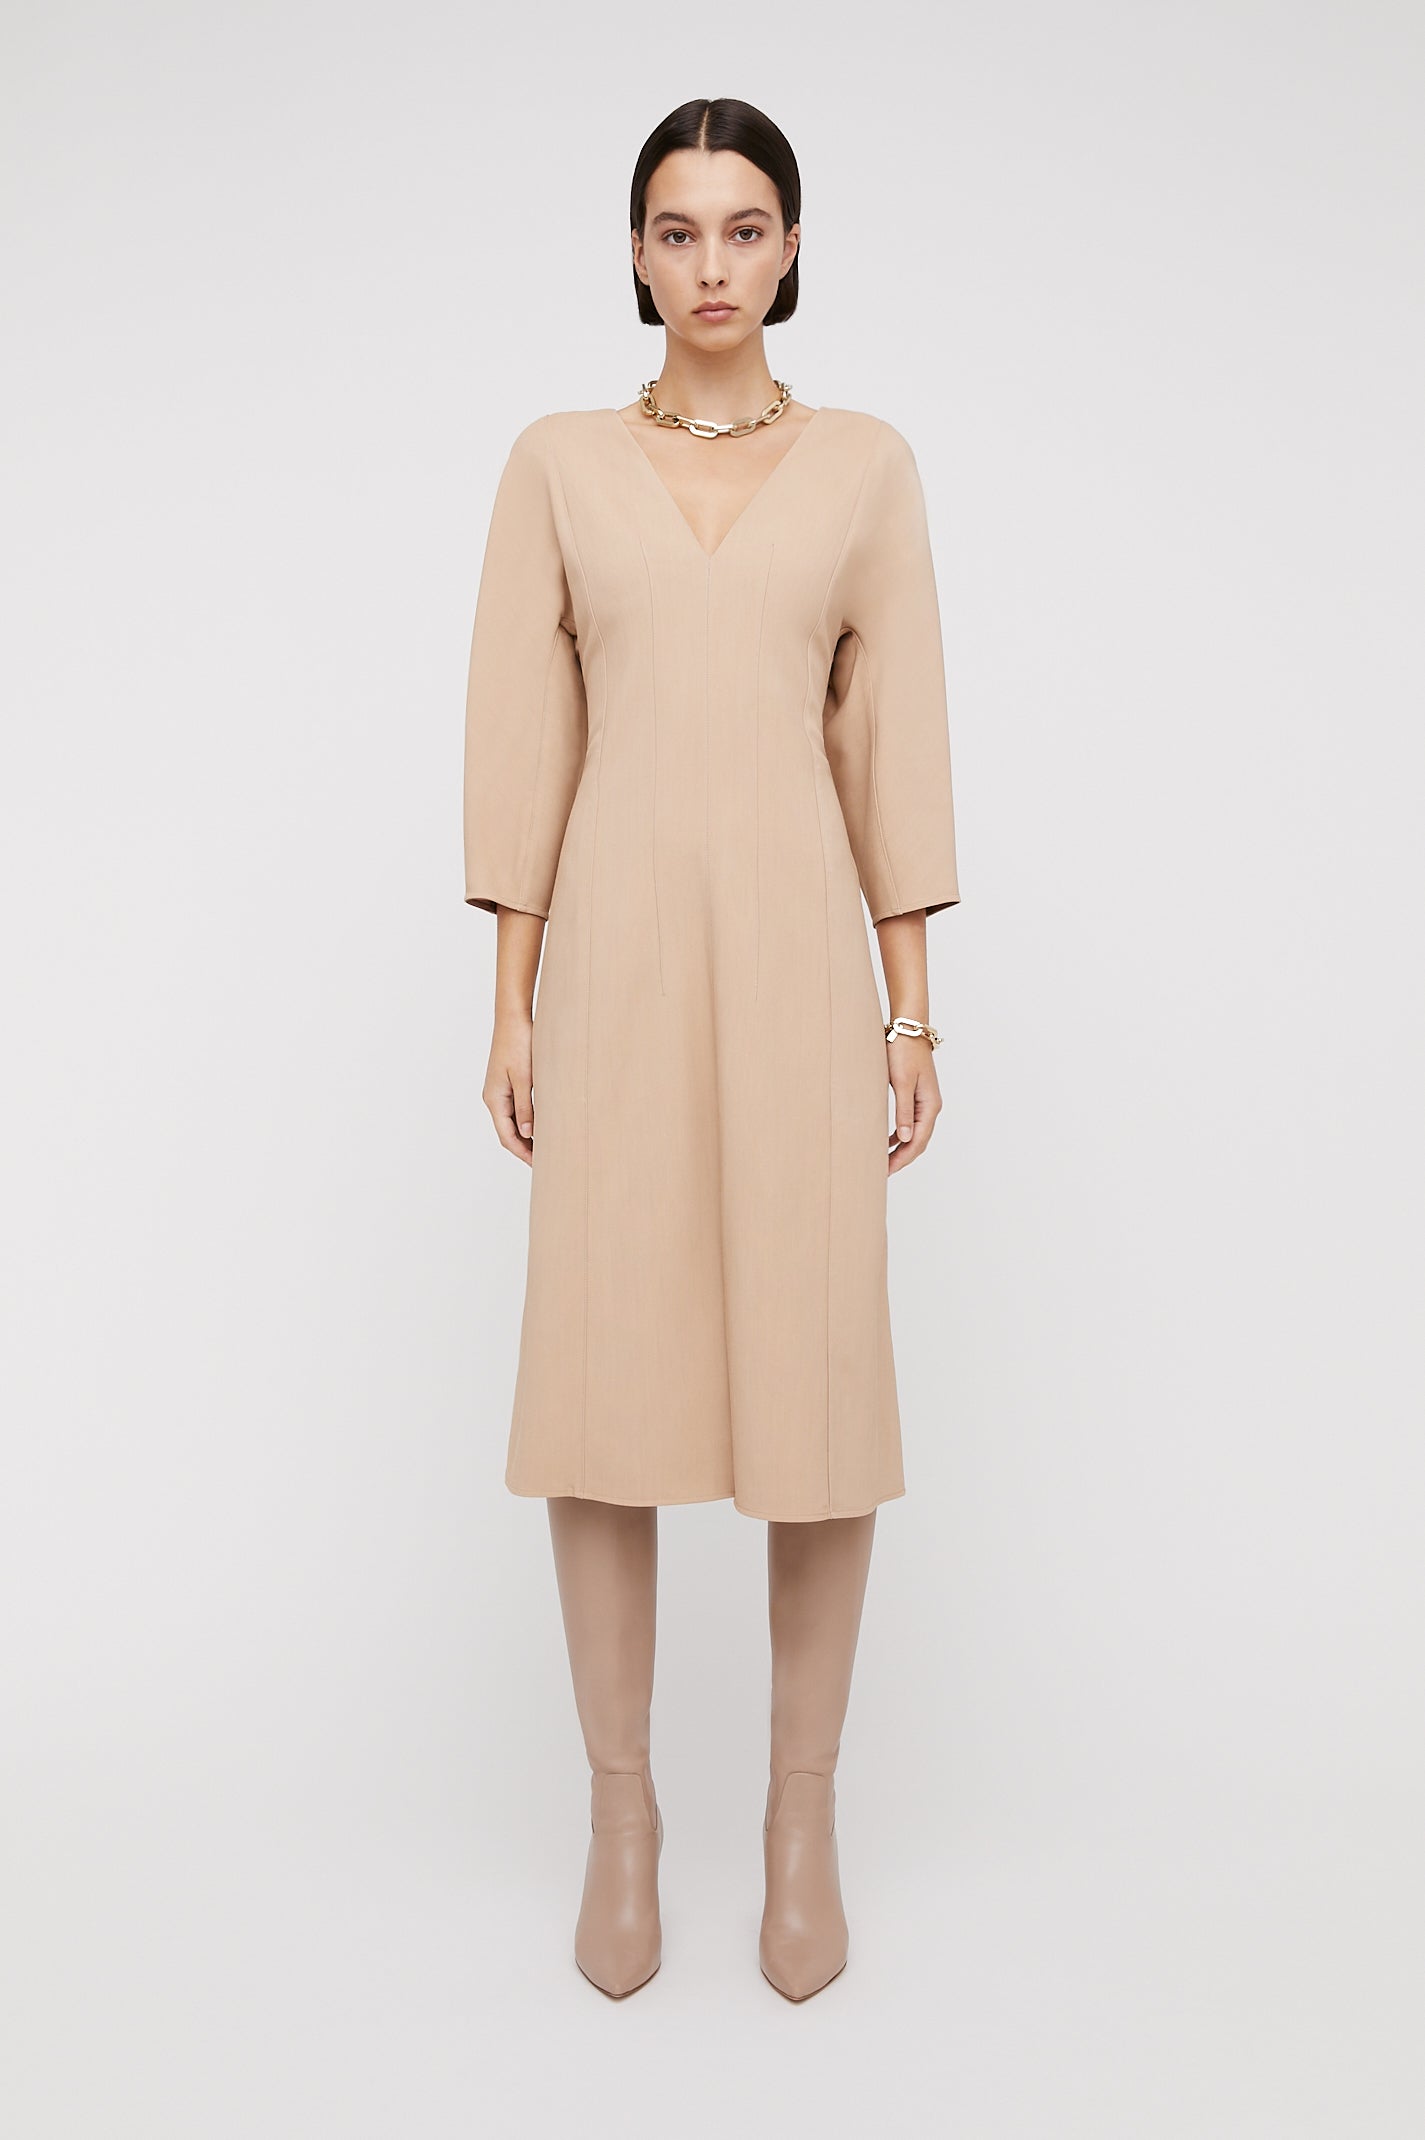 TAILORED COCOON SLEEVE L DRESS - CAPPUCCINO - Scanlan Theodore